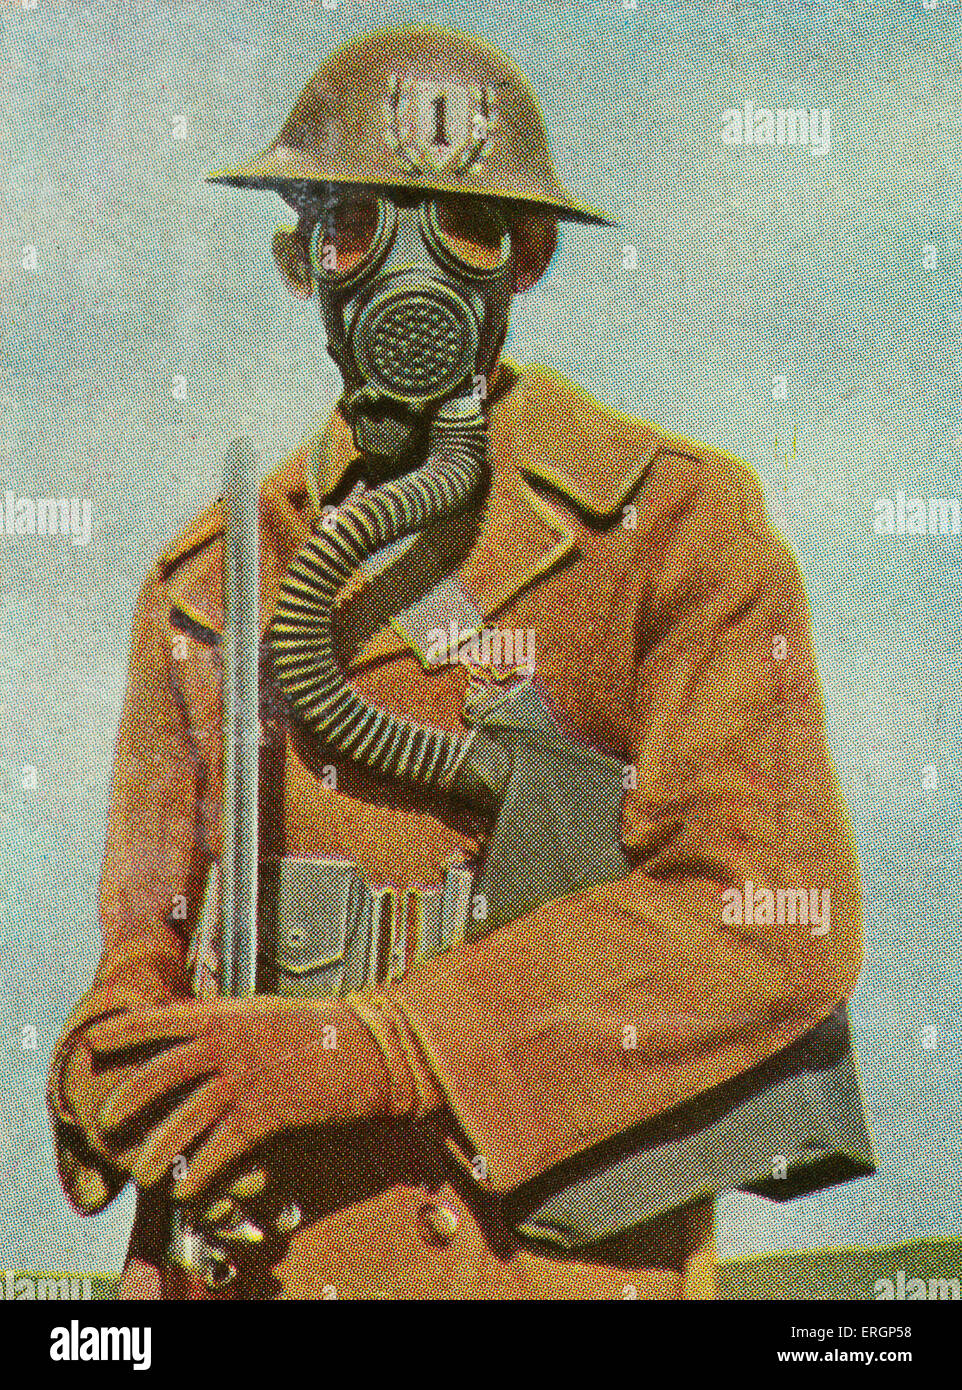 Gas masks: American infantryman with steel helmet, bayonet attached, and gas mask.   (Source: Cigarette cards published in Stock Photo